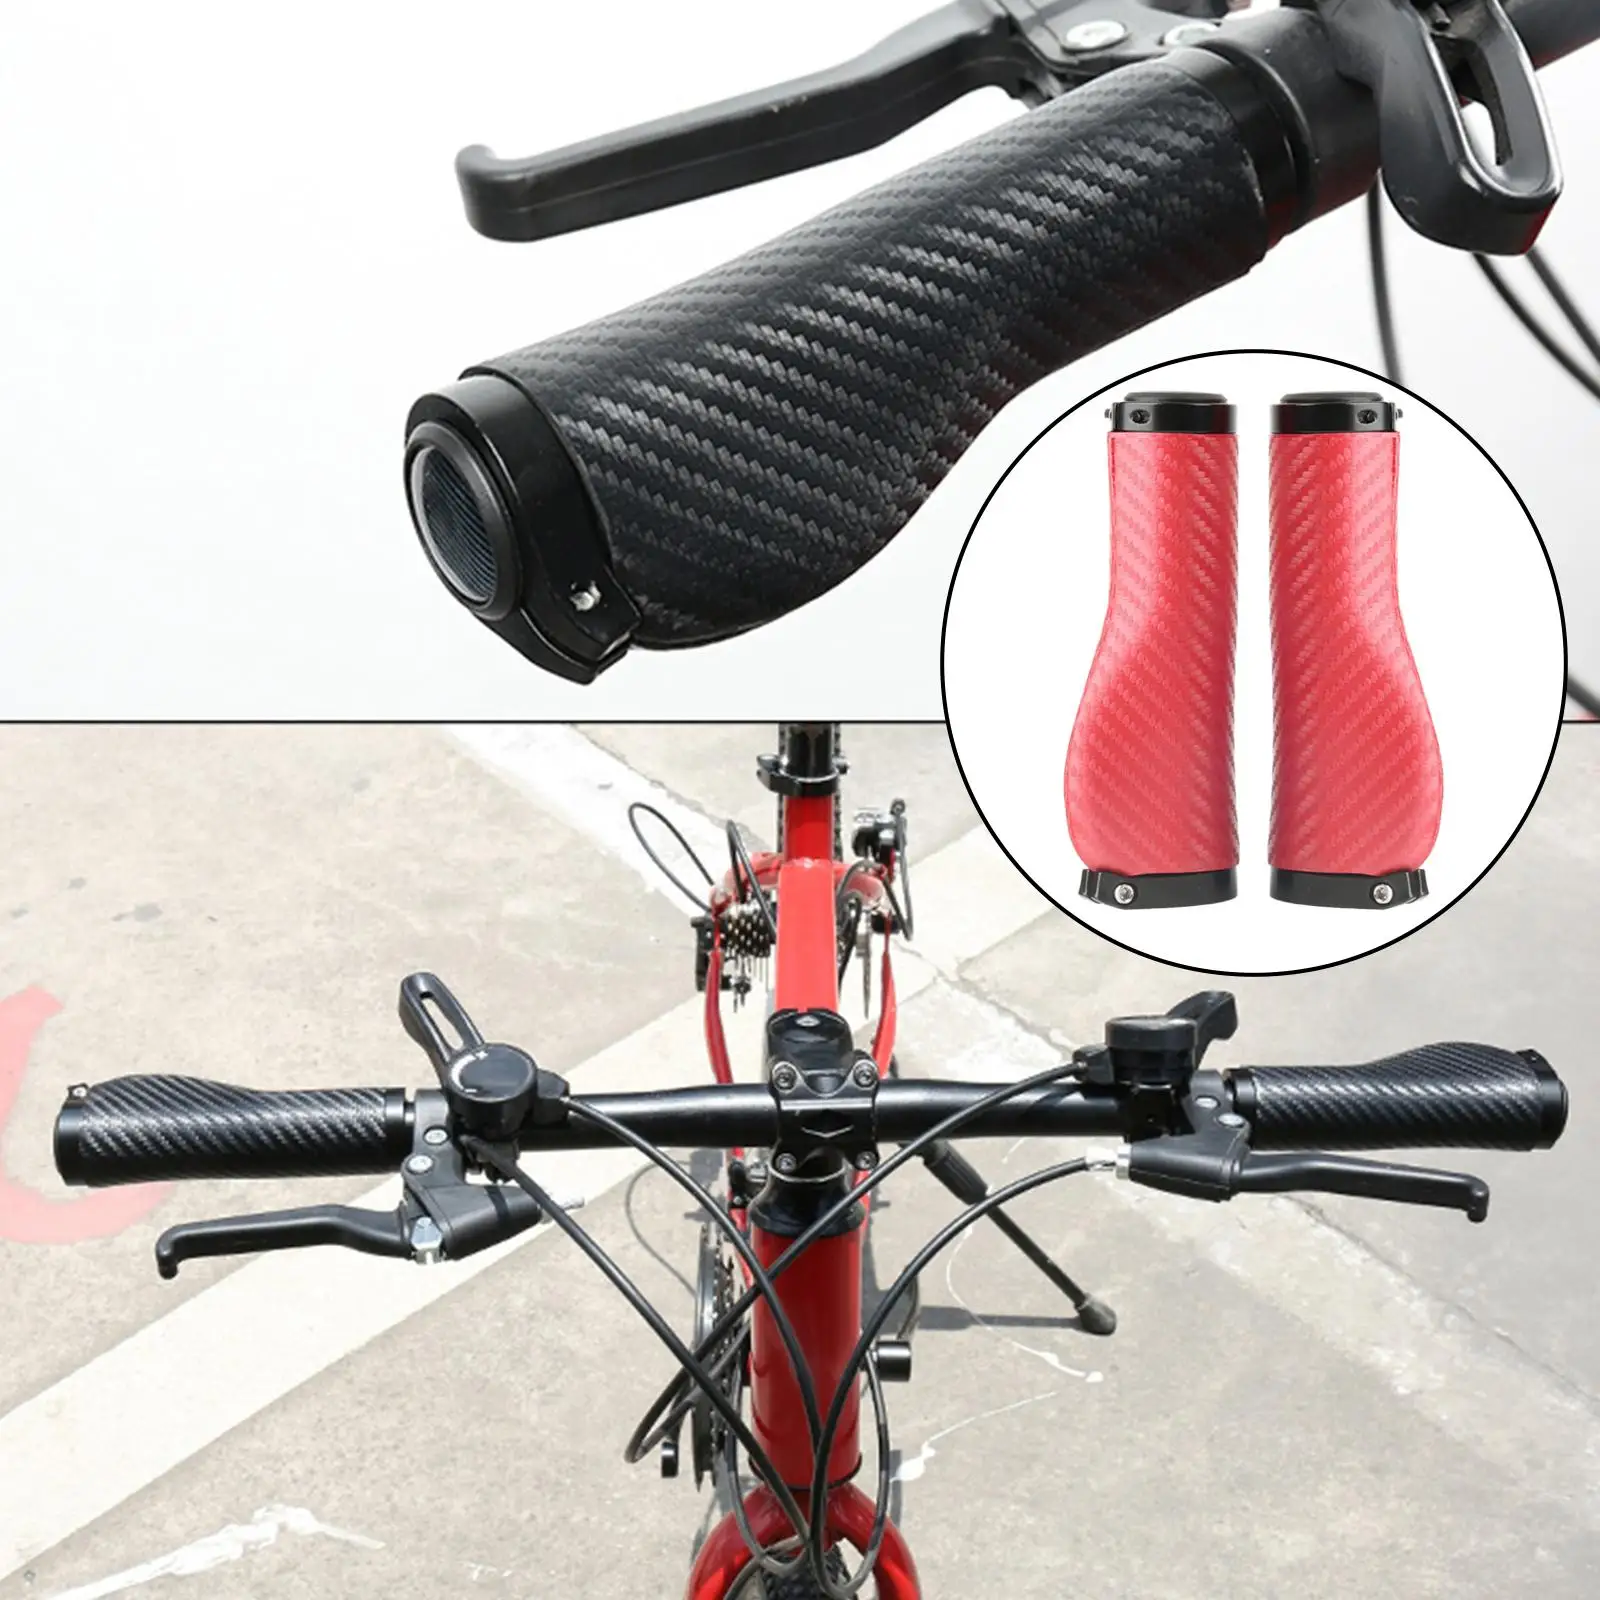 2x Universal Bicycle Handlebar Grips Lockable Anti Skid Bar Grips for Scooter Road Bike E Bike Cycling Parts Shock Absorption